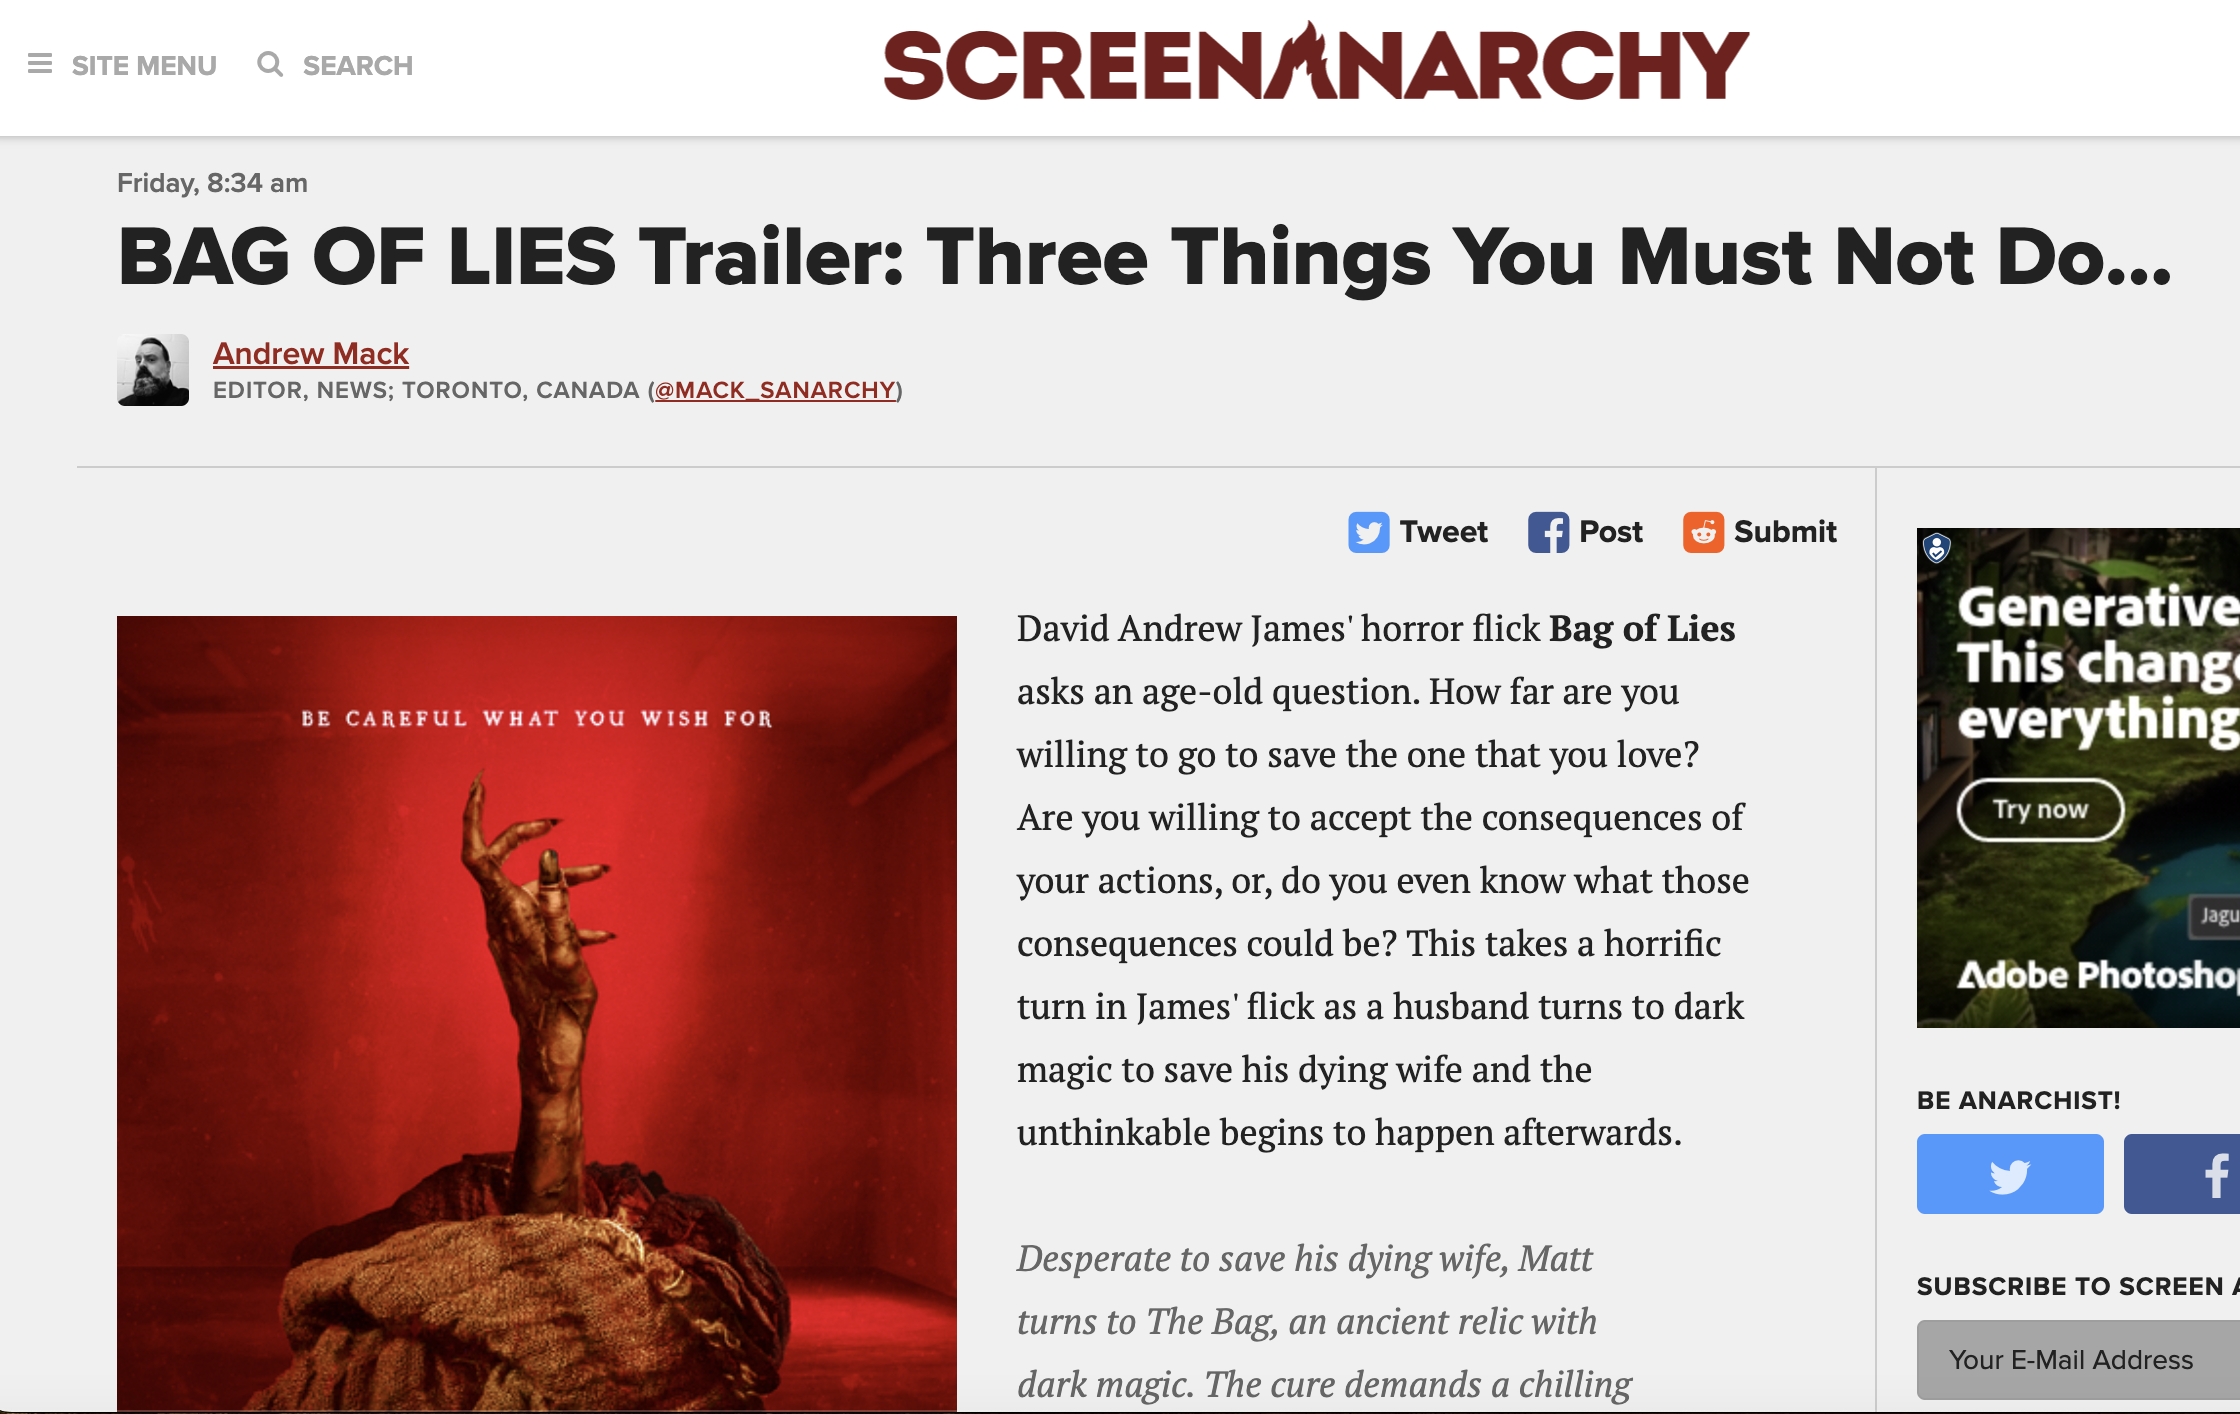 BAG OF LIES Trailer: Three Things You Must Not Do...